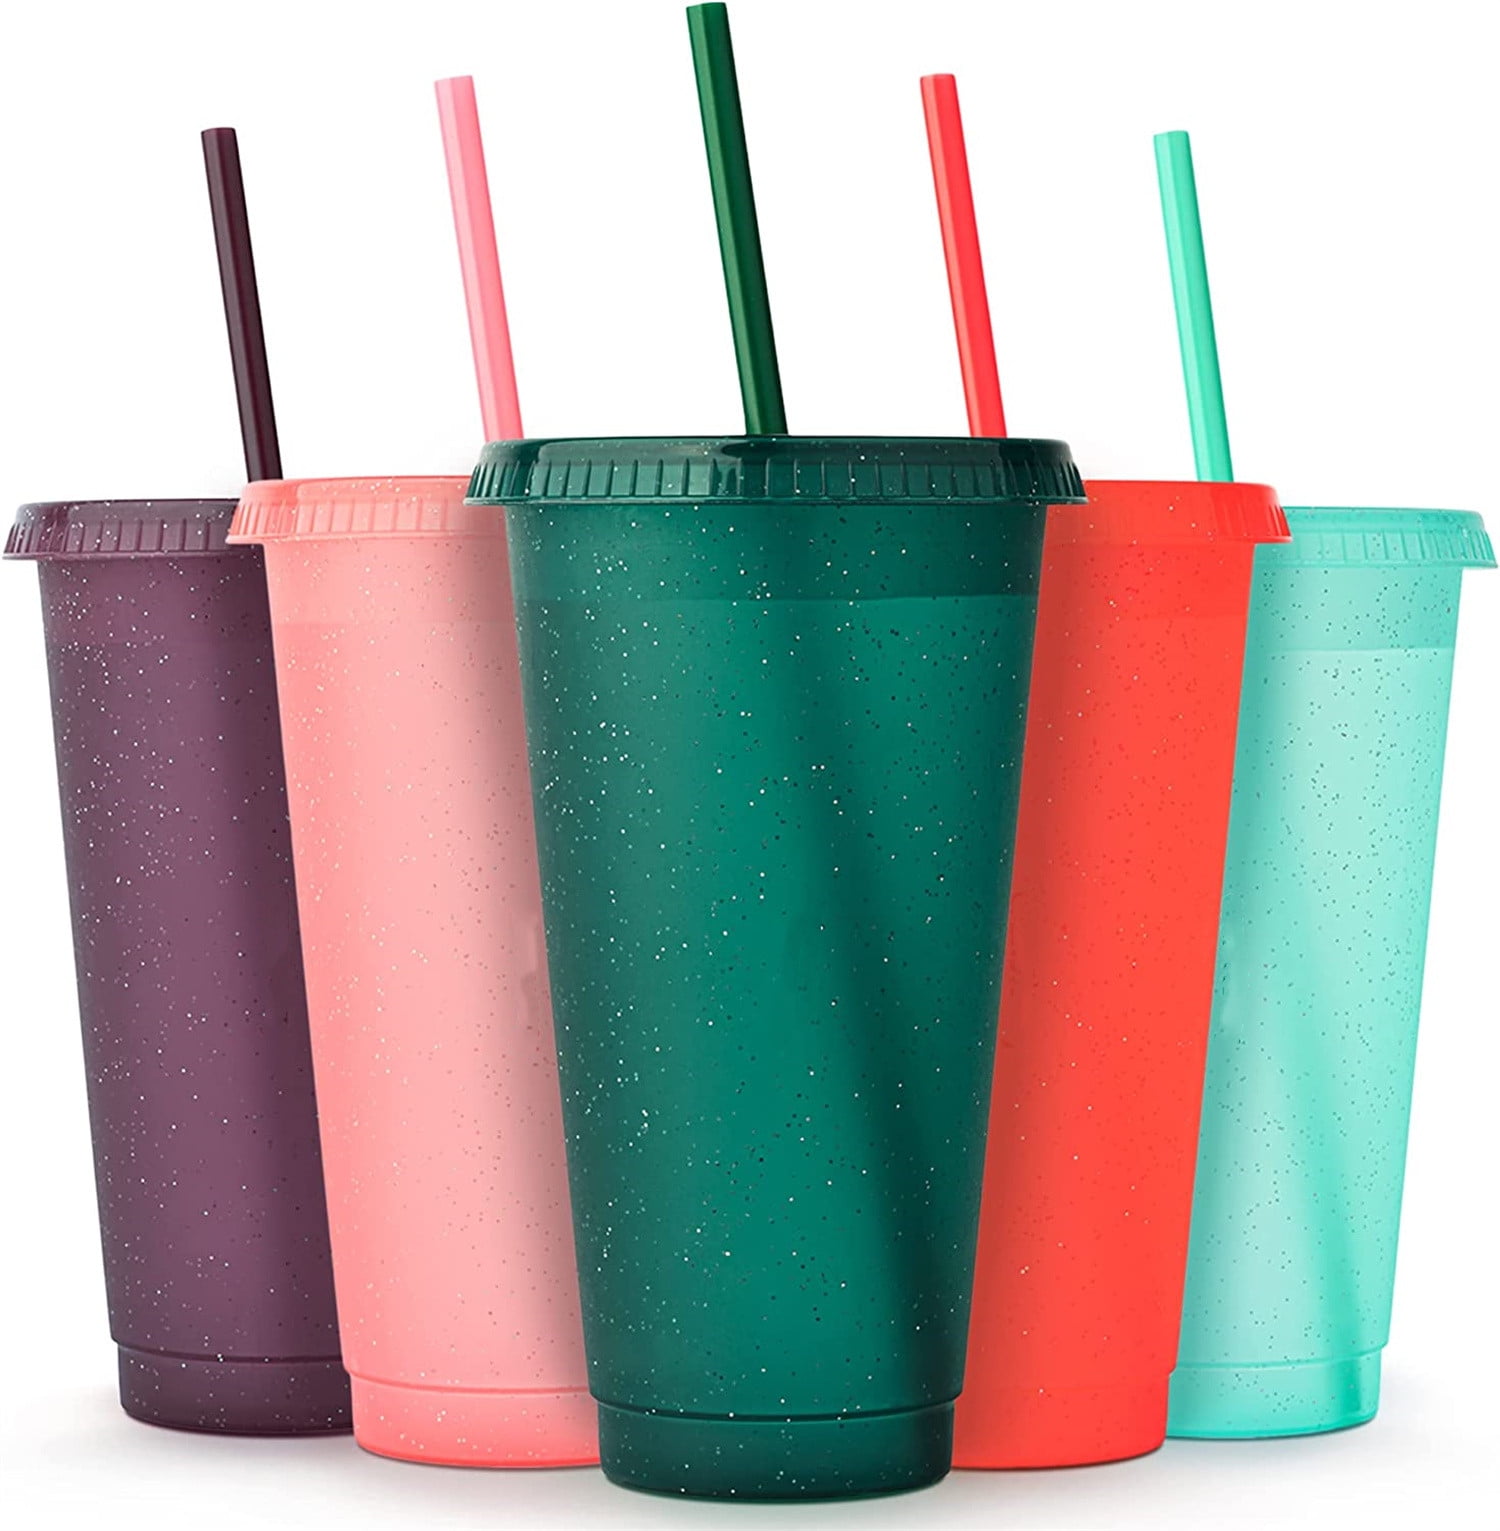 Plastic Iced Coffee Cup Lid Reusable  Iced Coffee Tumblers Straw - 5/10pcs  Cute - Aliexpress